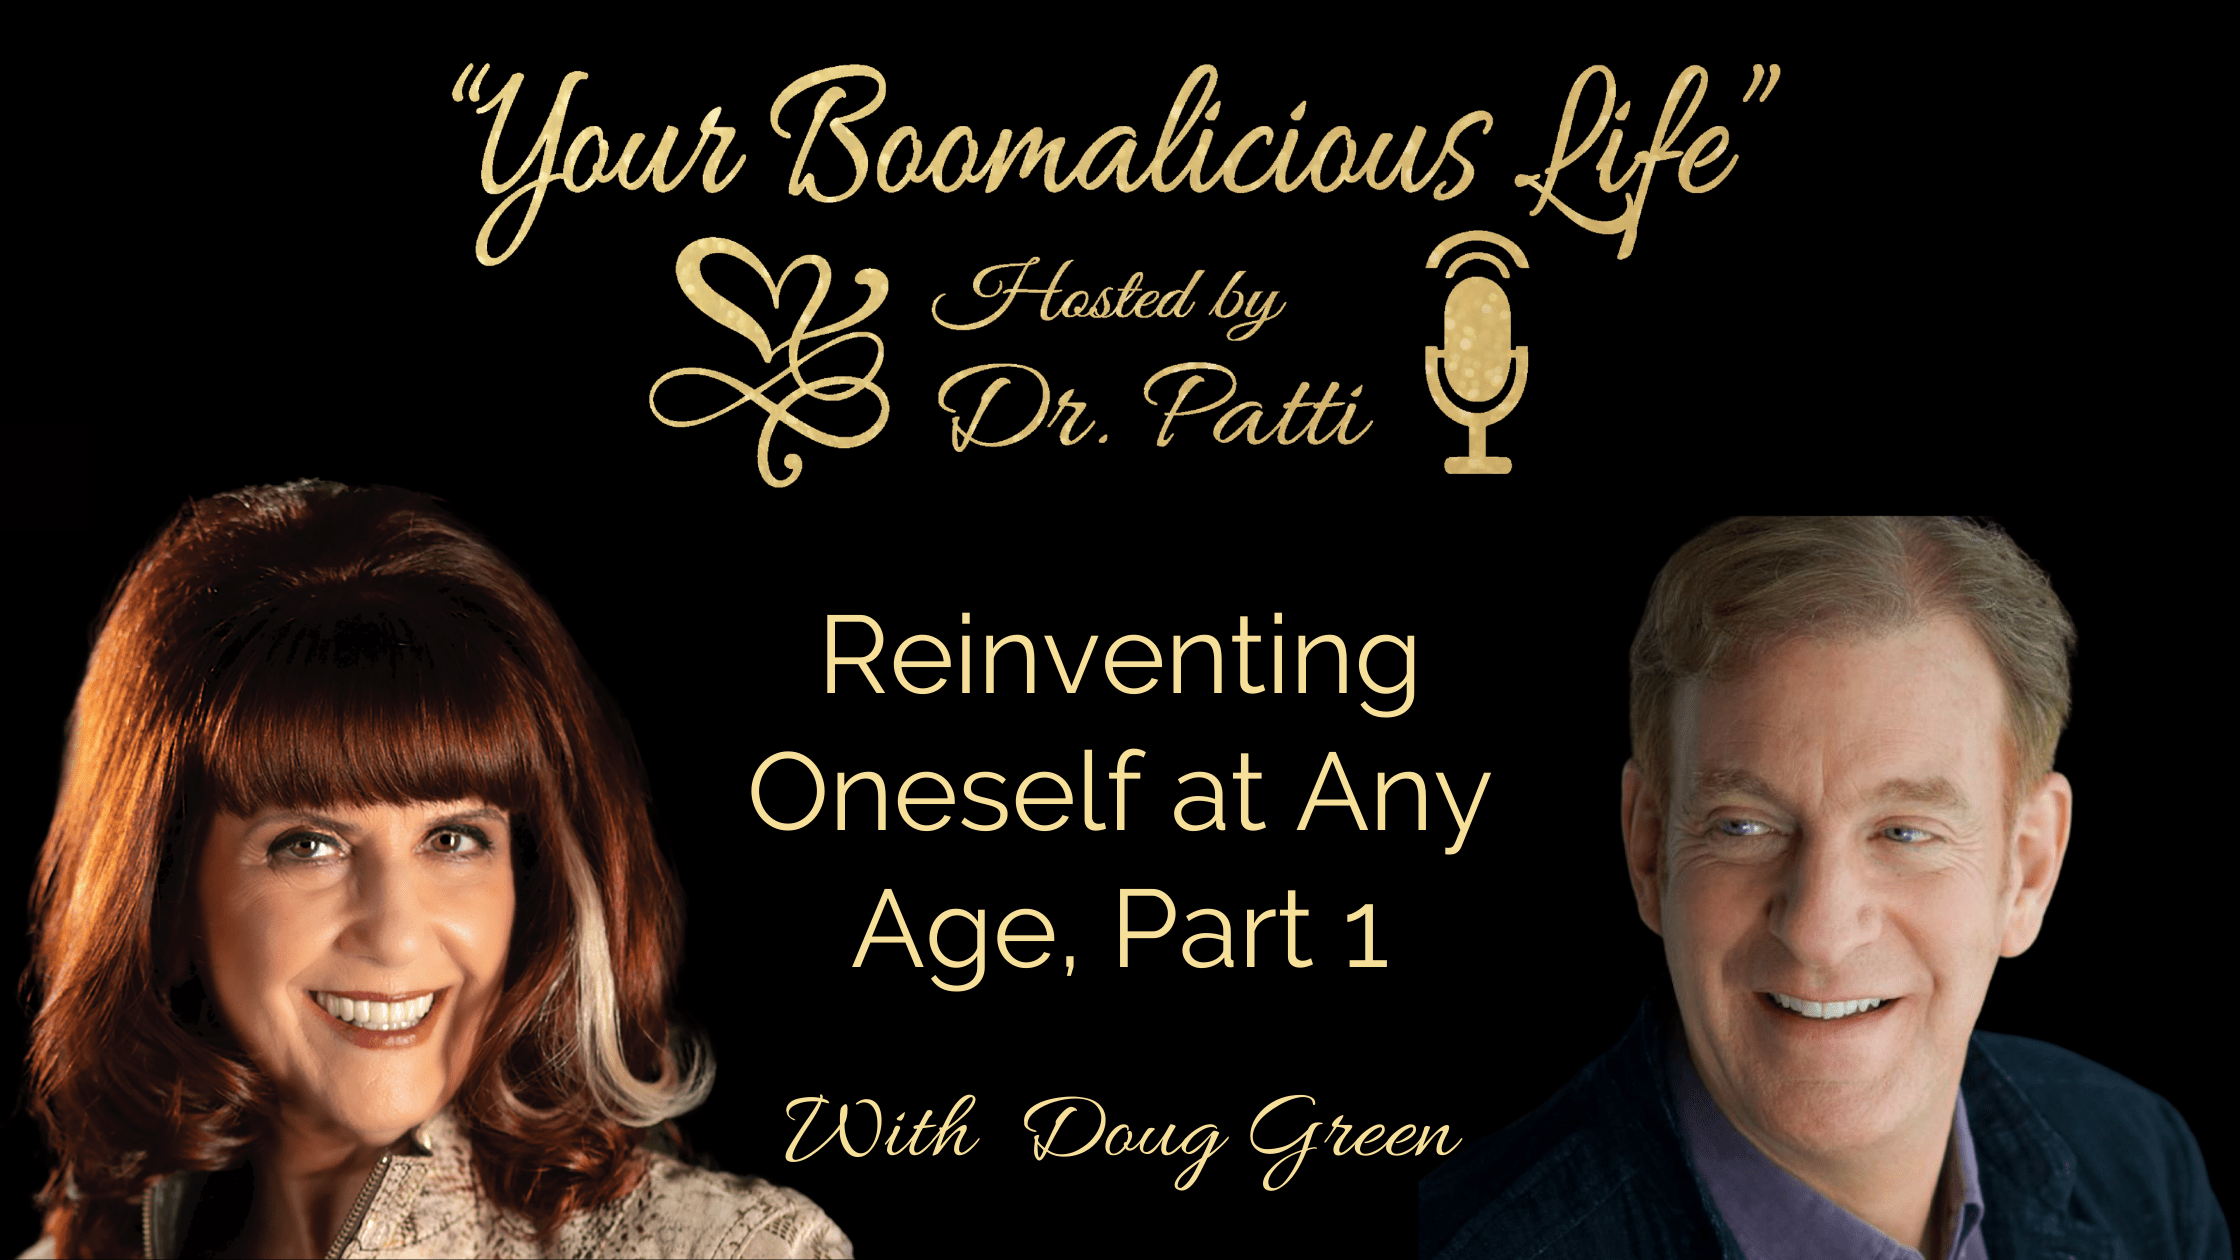 Dr. Patti Britton and Doug Green discuss Reinventing Oneself at Any Age part 1